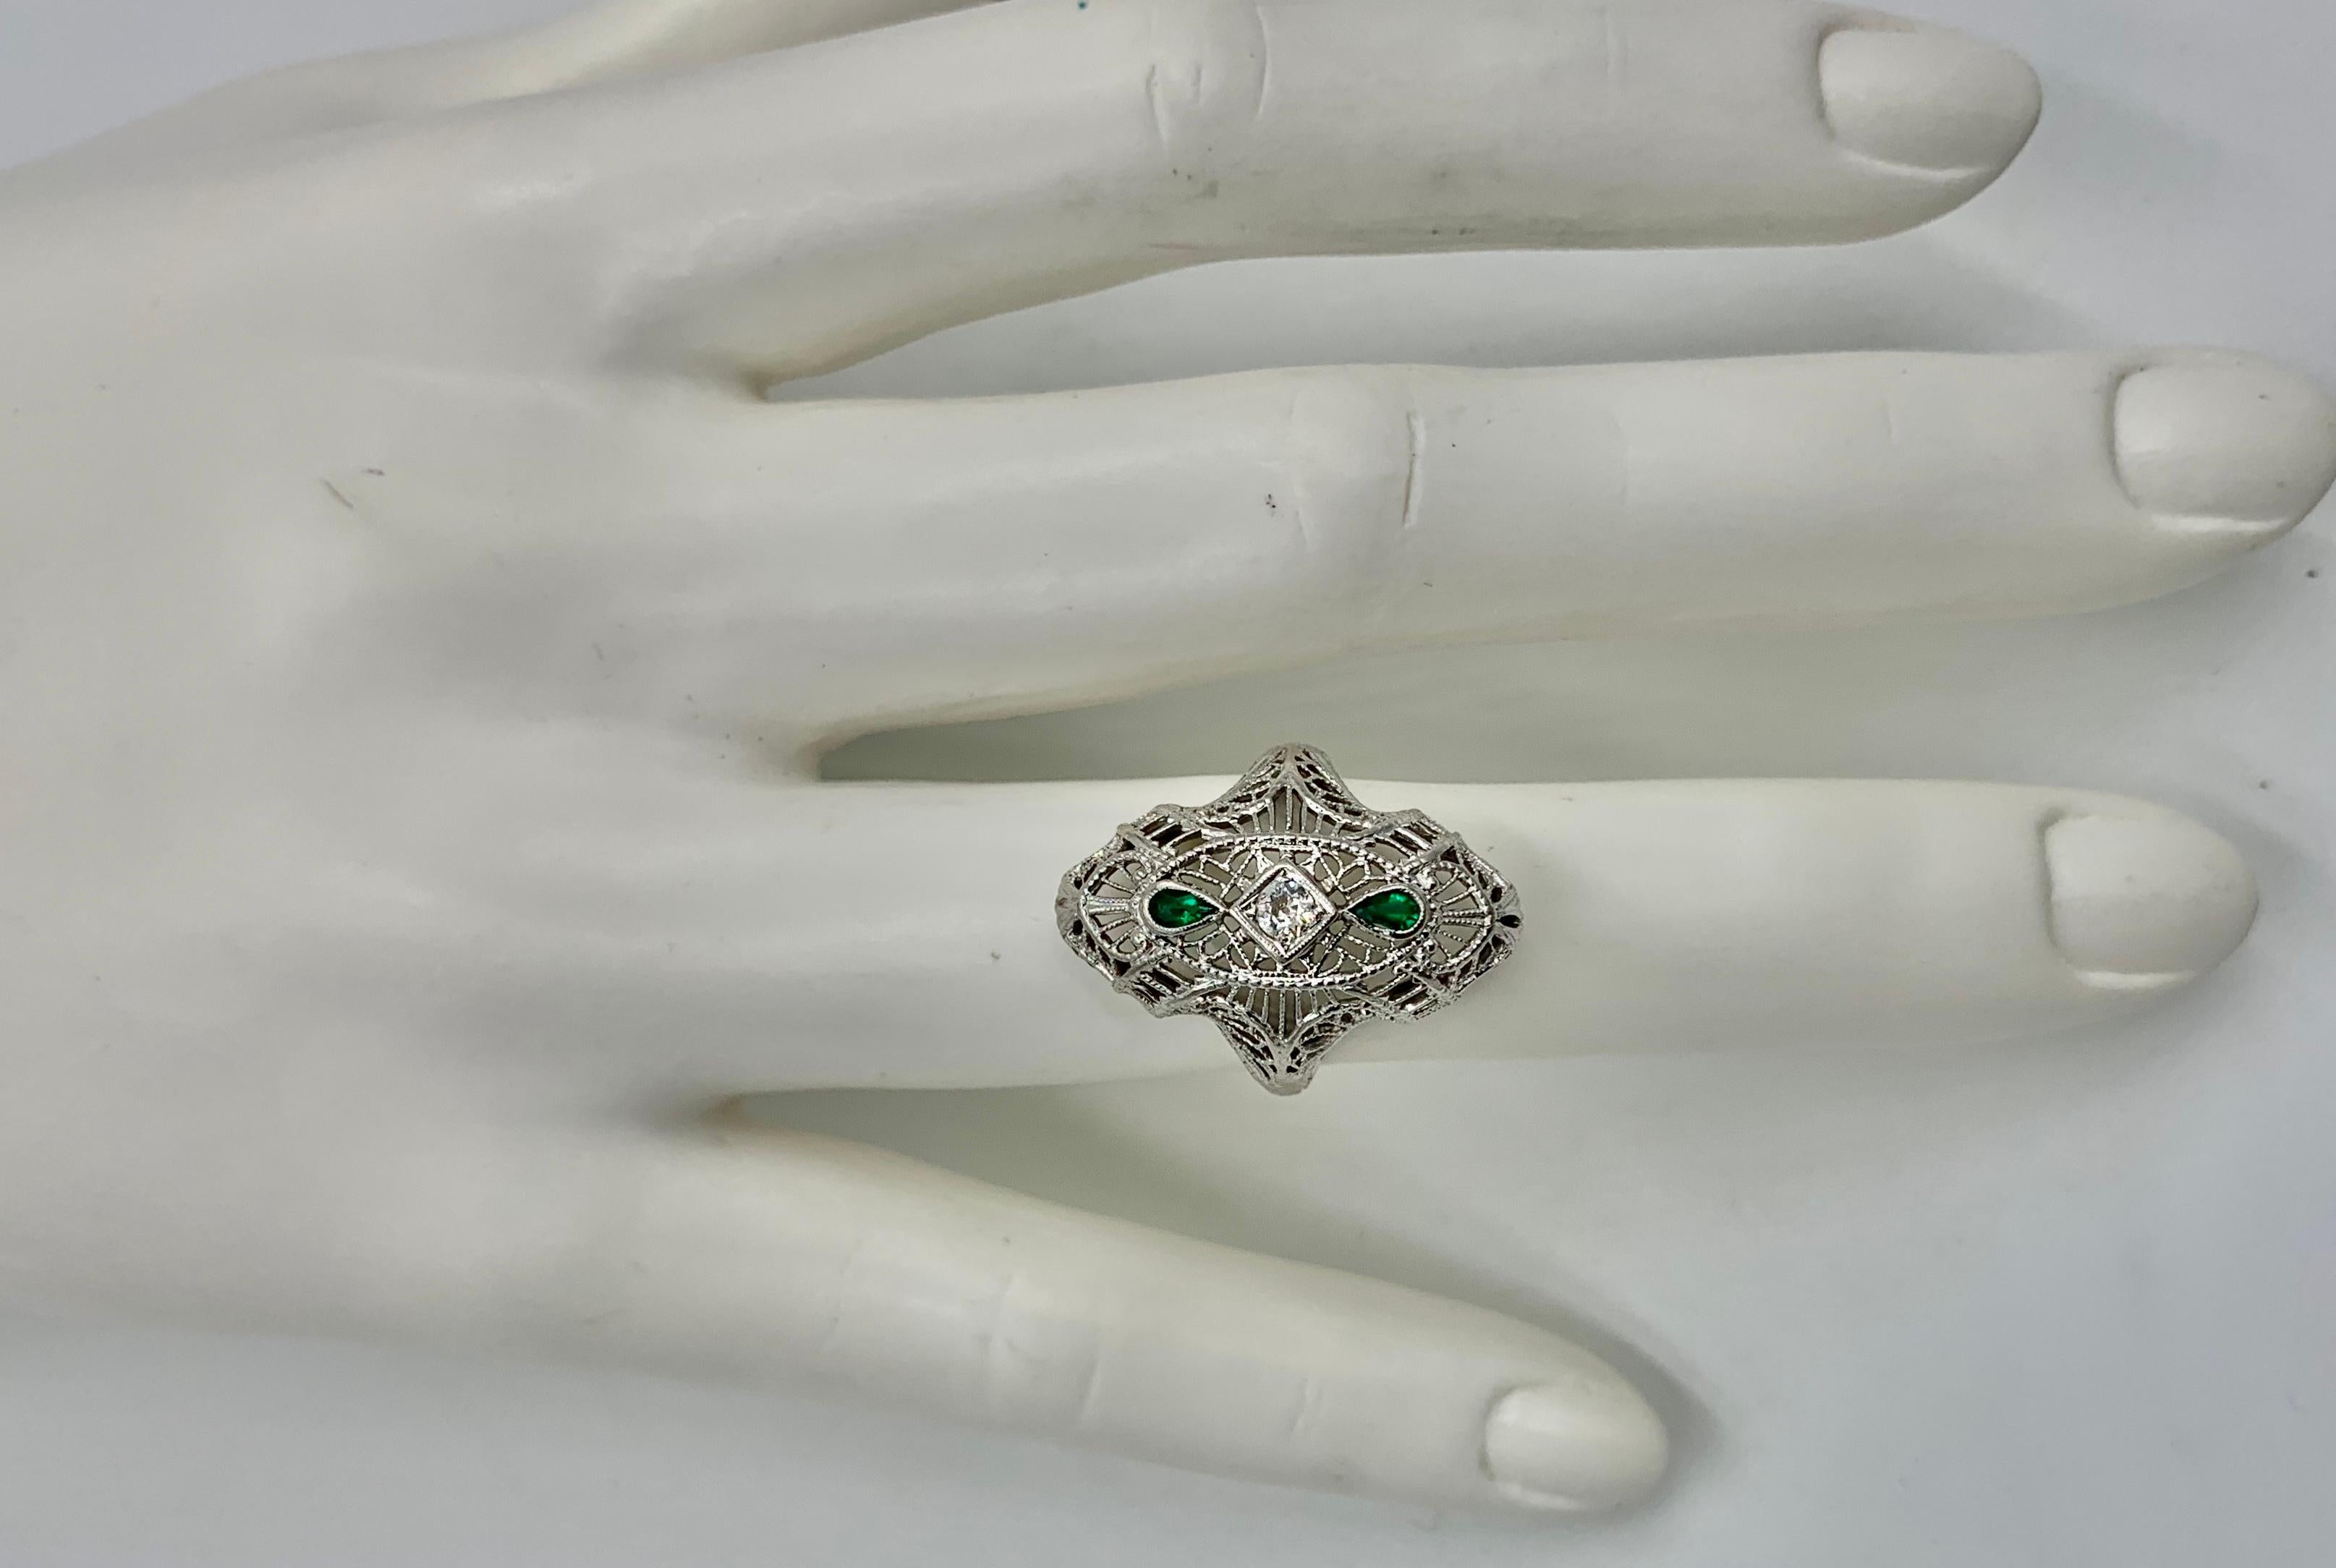 This is a stunning Antique Art Deco - Edwardian Emerald and Diamond Wedding Ring Engagement Ring set with a gorgeous Old Mine Cut Diamond in the center with two pear shape Emerald gems in an exuberant filigree engraved setting in 14 Karat White